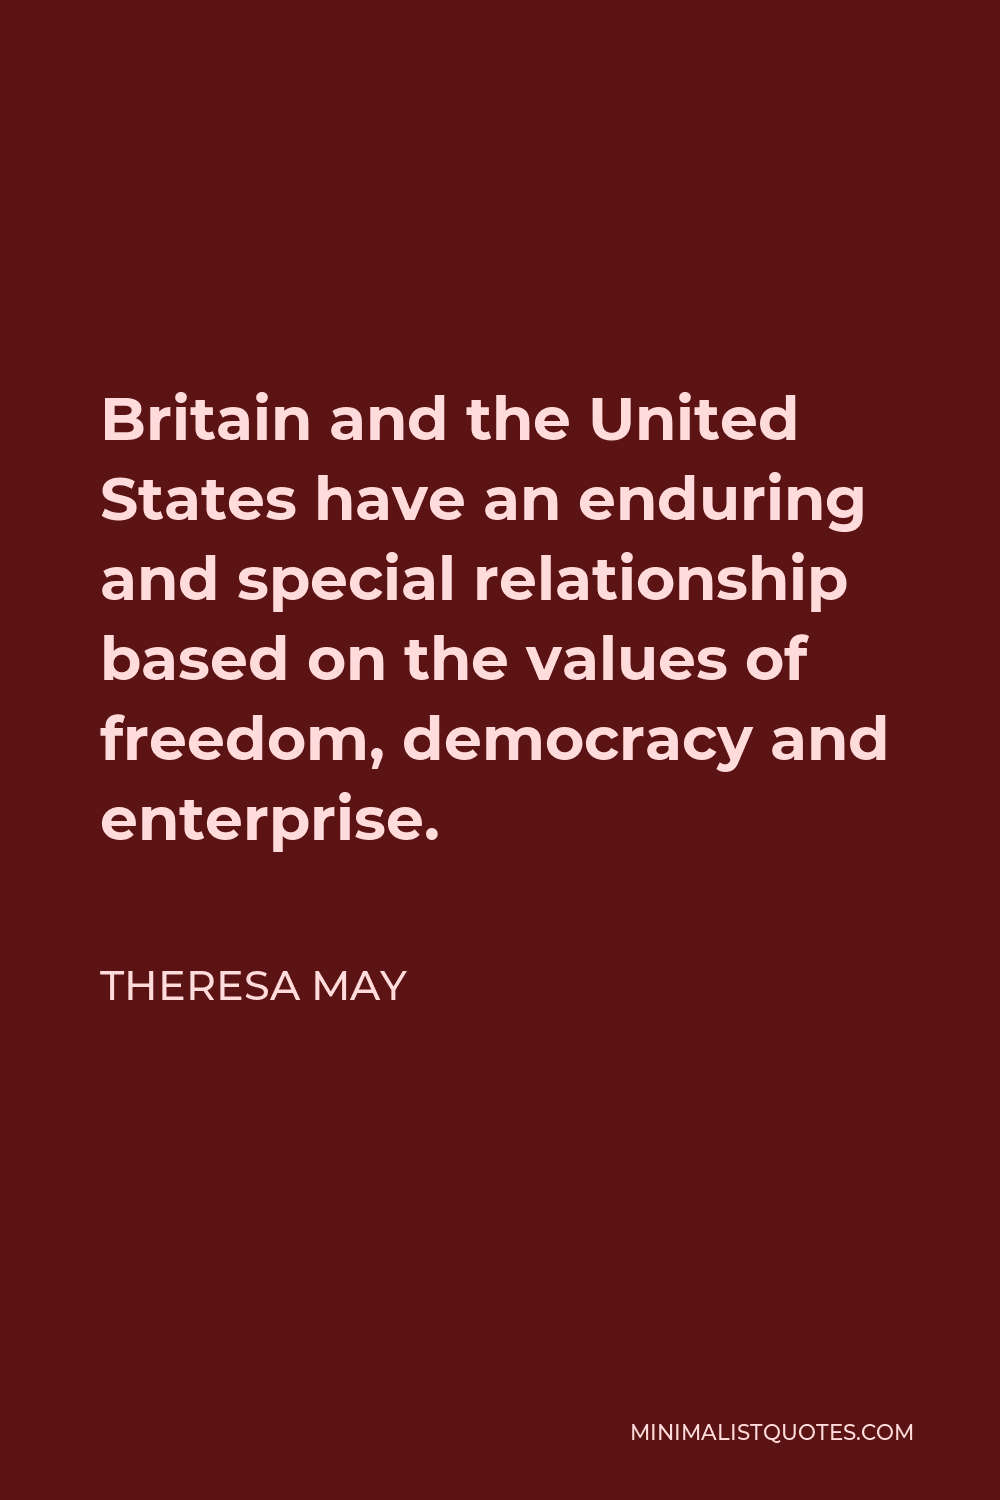 Theresa May Quote - Britain and the United States have an enduring and special relationship based on the values of freedom, democracy and enterprise.